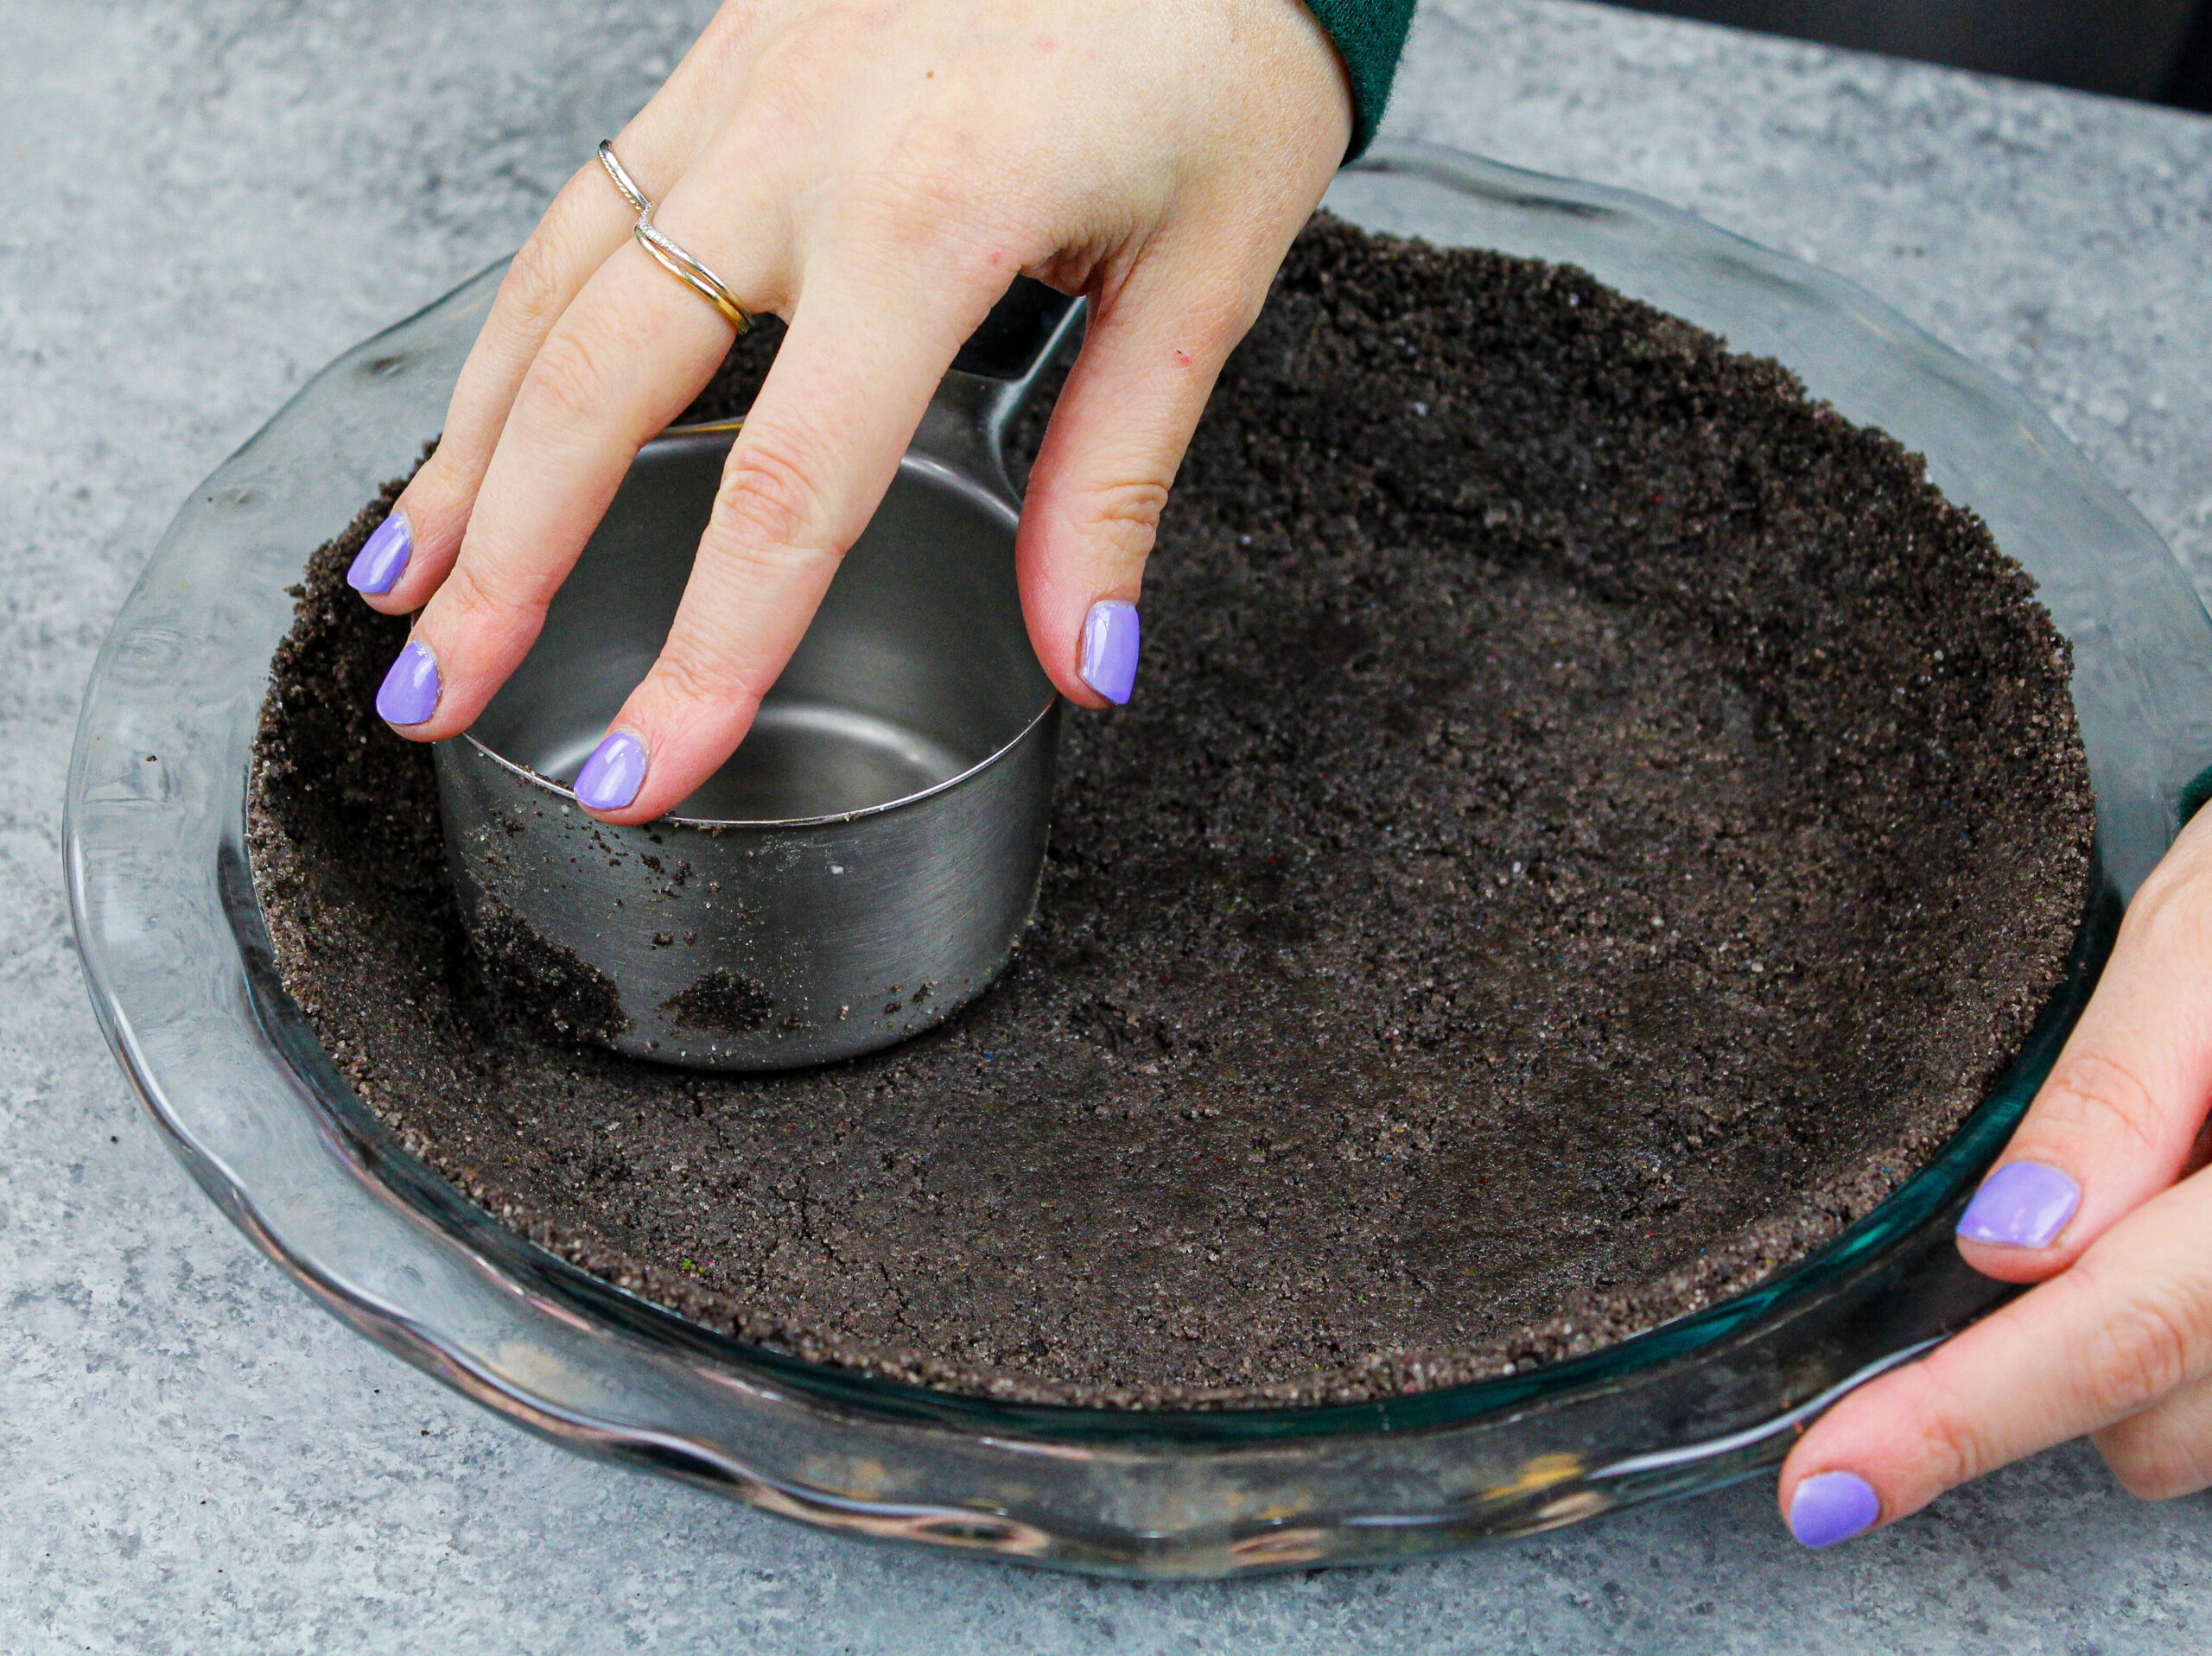 image of an oreo pie crust being made and pressed into a pie pan using a metal measuring cup